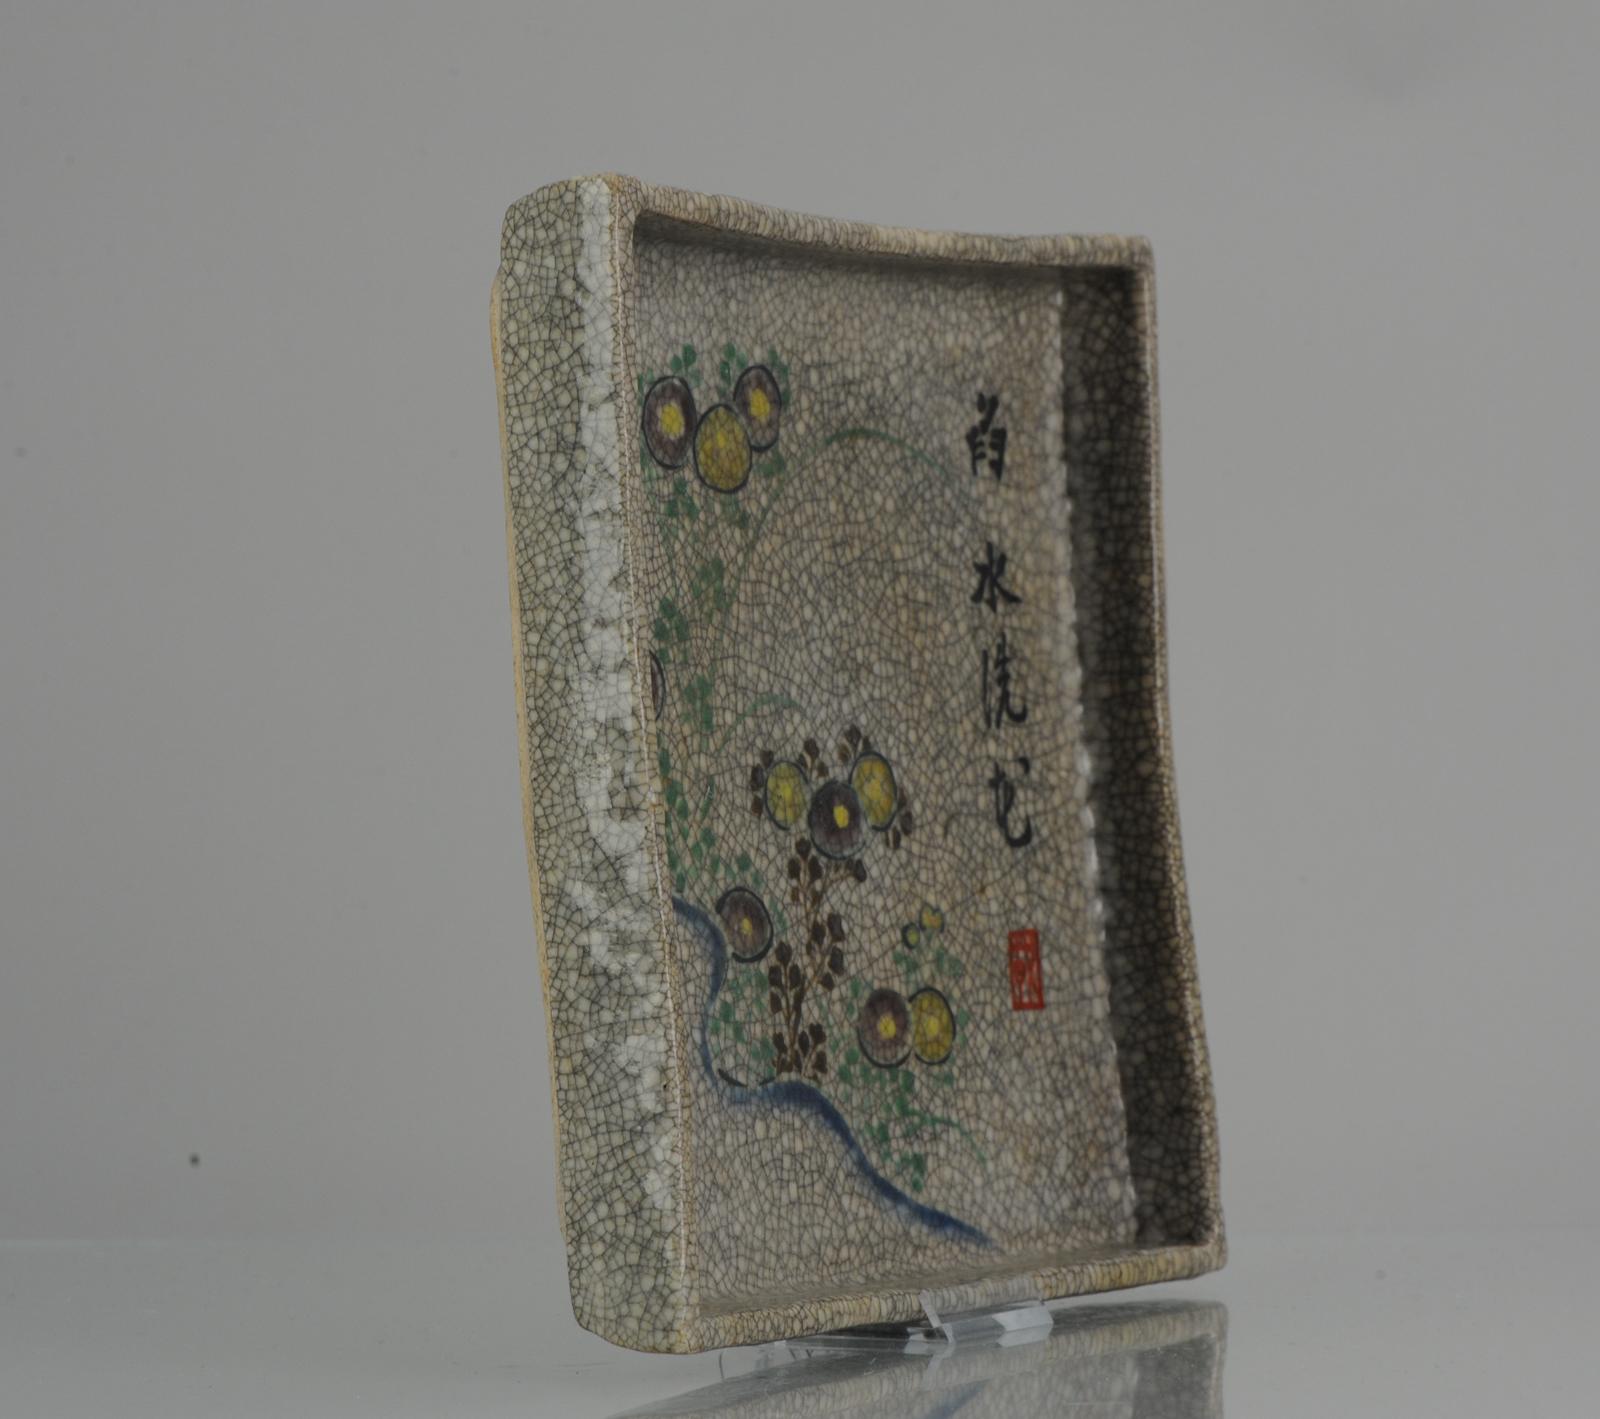 Antique Japanese Tray for Water FLowers and Calligraphy, 19th/20th Century

A nice tray for water

Additional information:
Material: Porcelain & Pottery
Type: Vases
Region of Origin: Japan
Period: 19th century, 20th century